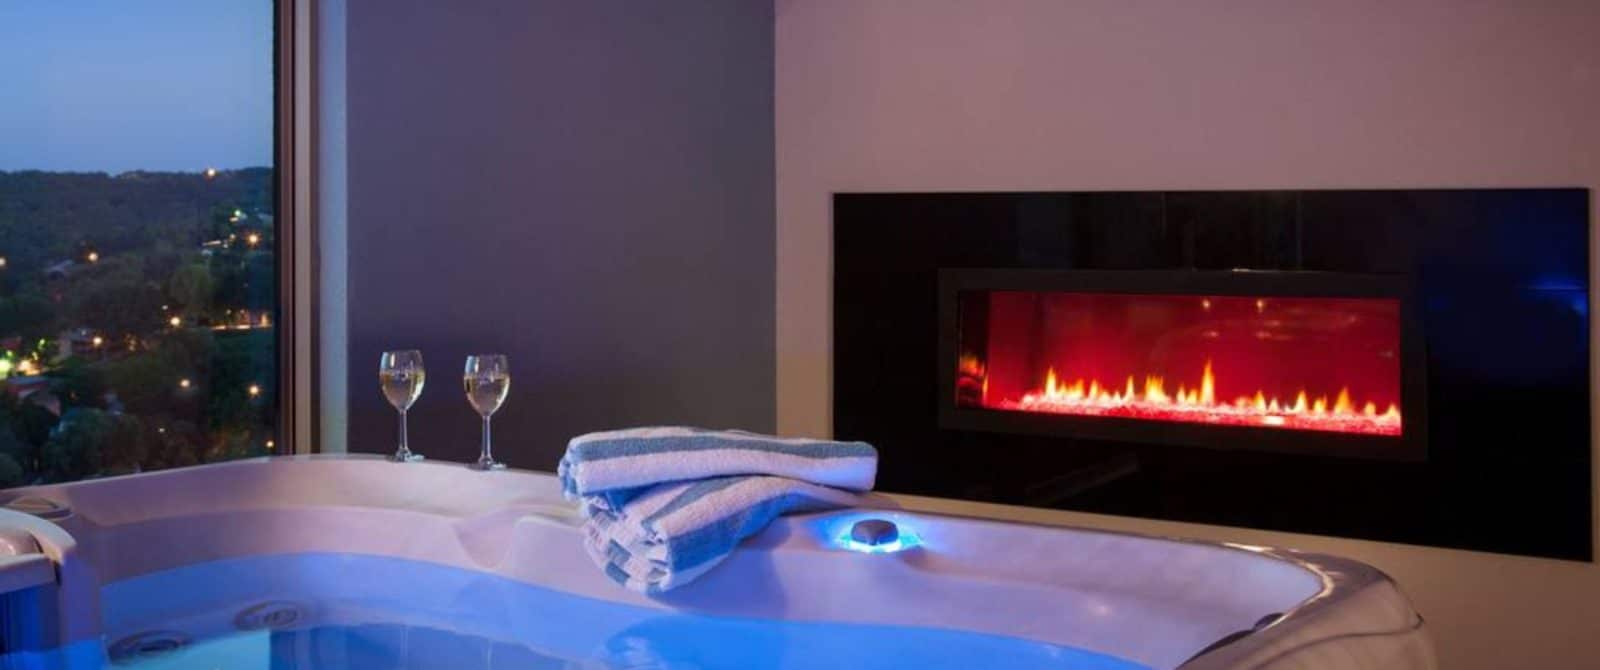 Jetted tub in front of a linear gas fireplace and a window overlooking the town of Hermann at night.